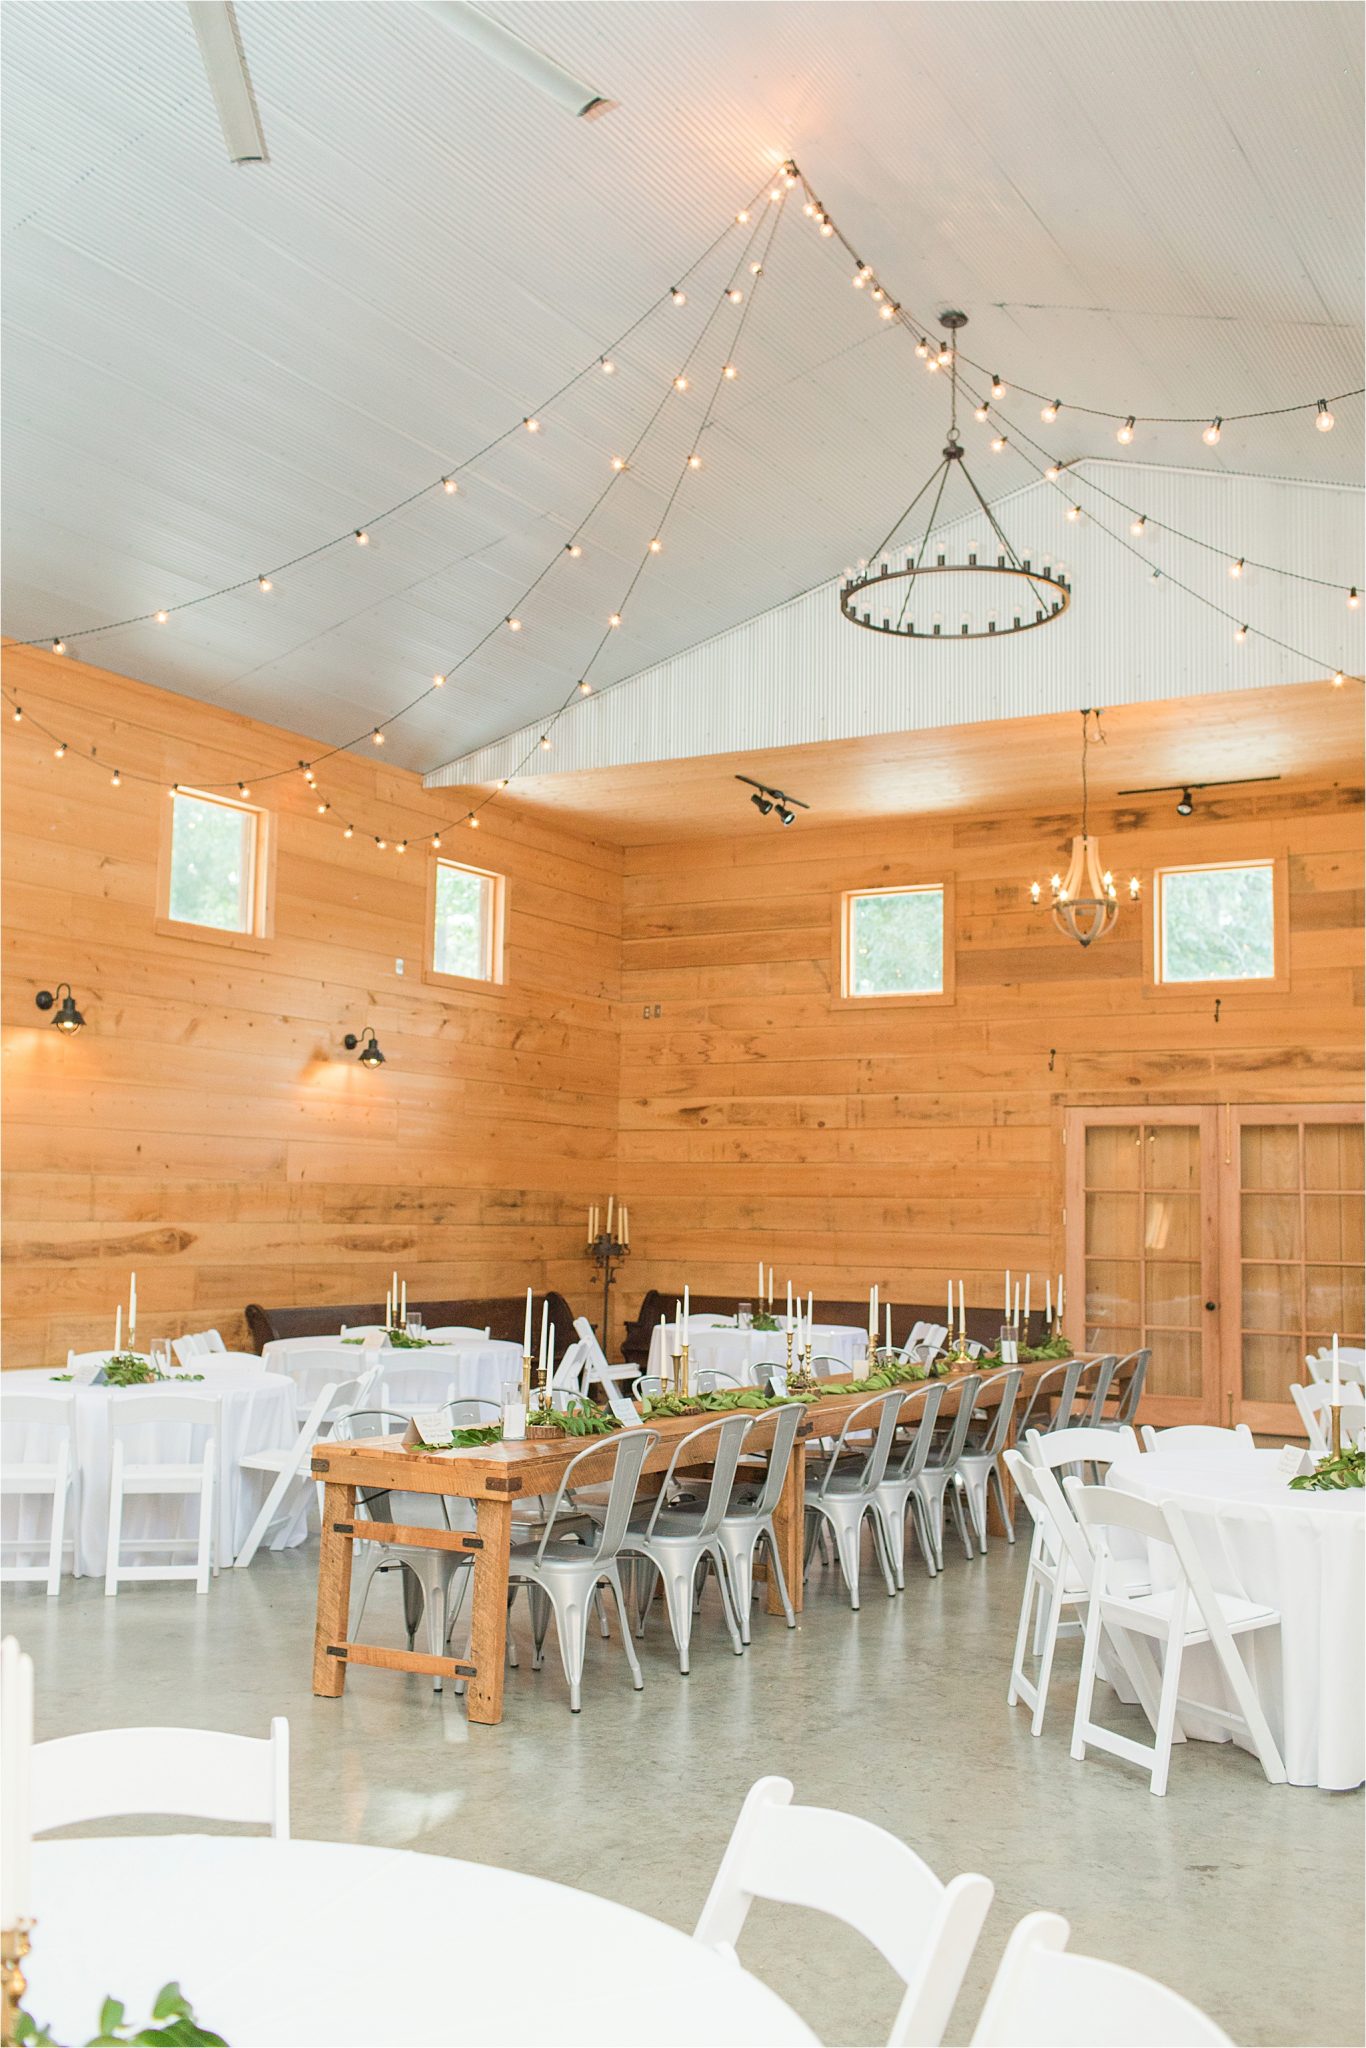 wedding-reception-alabama-venue-barn-farm-tables-metal-chairs-candle-centerpieces-hanging-lights